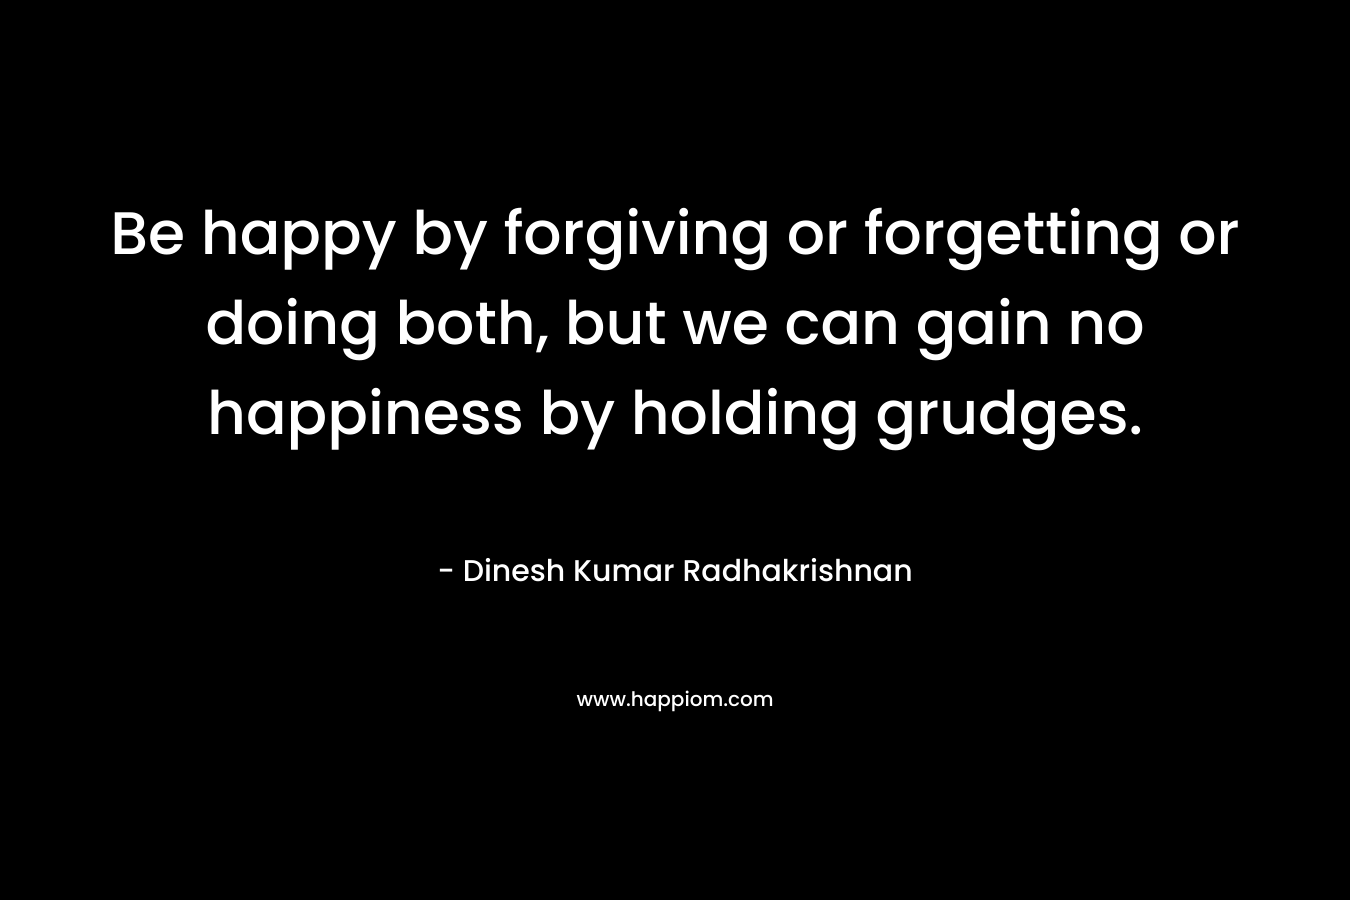 Be happy by forgiving or forgetting or doing both, but we can gain no happiness by holding grudges.